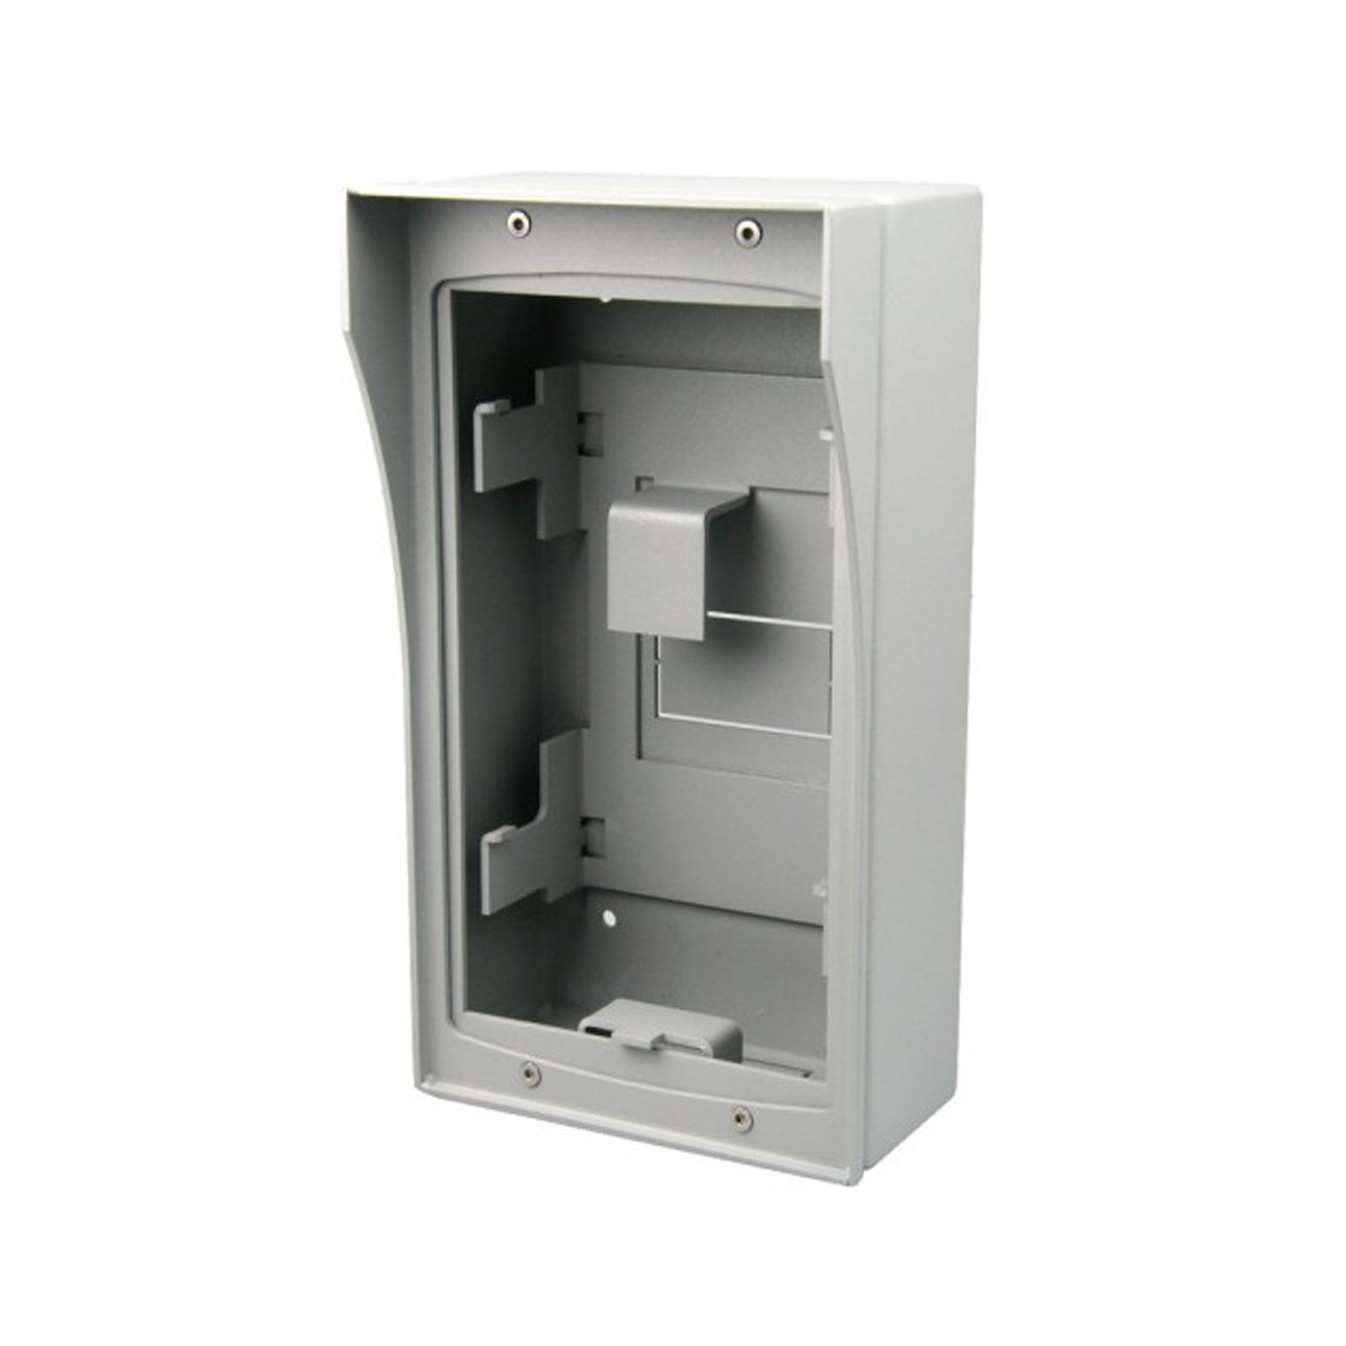 Hikvision Door Entry Mounted Box DS-KAB01